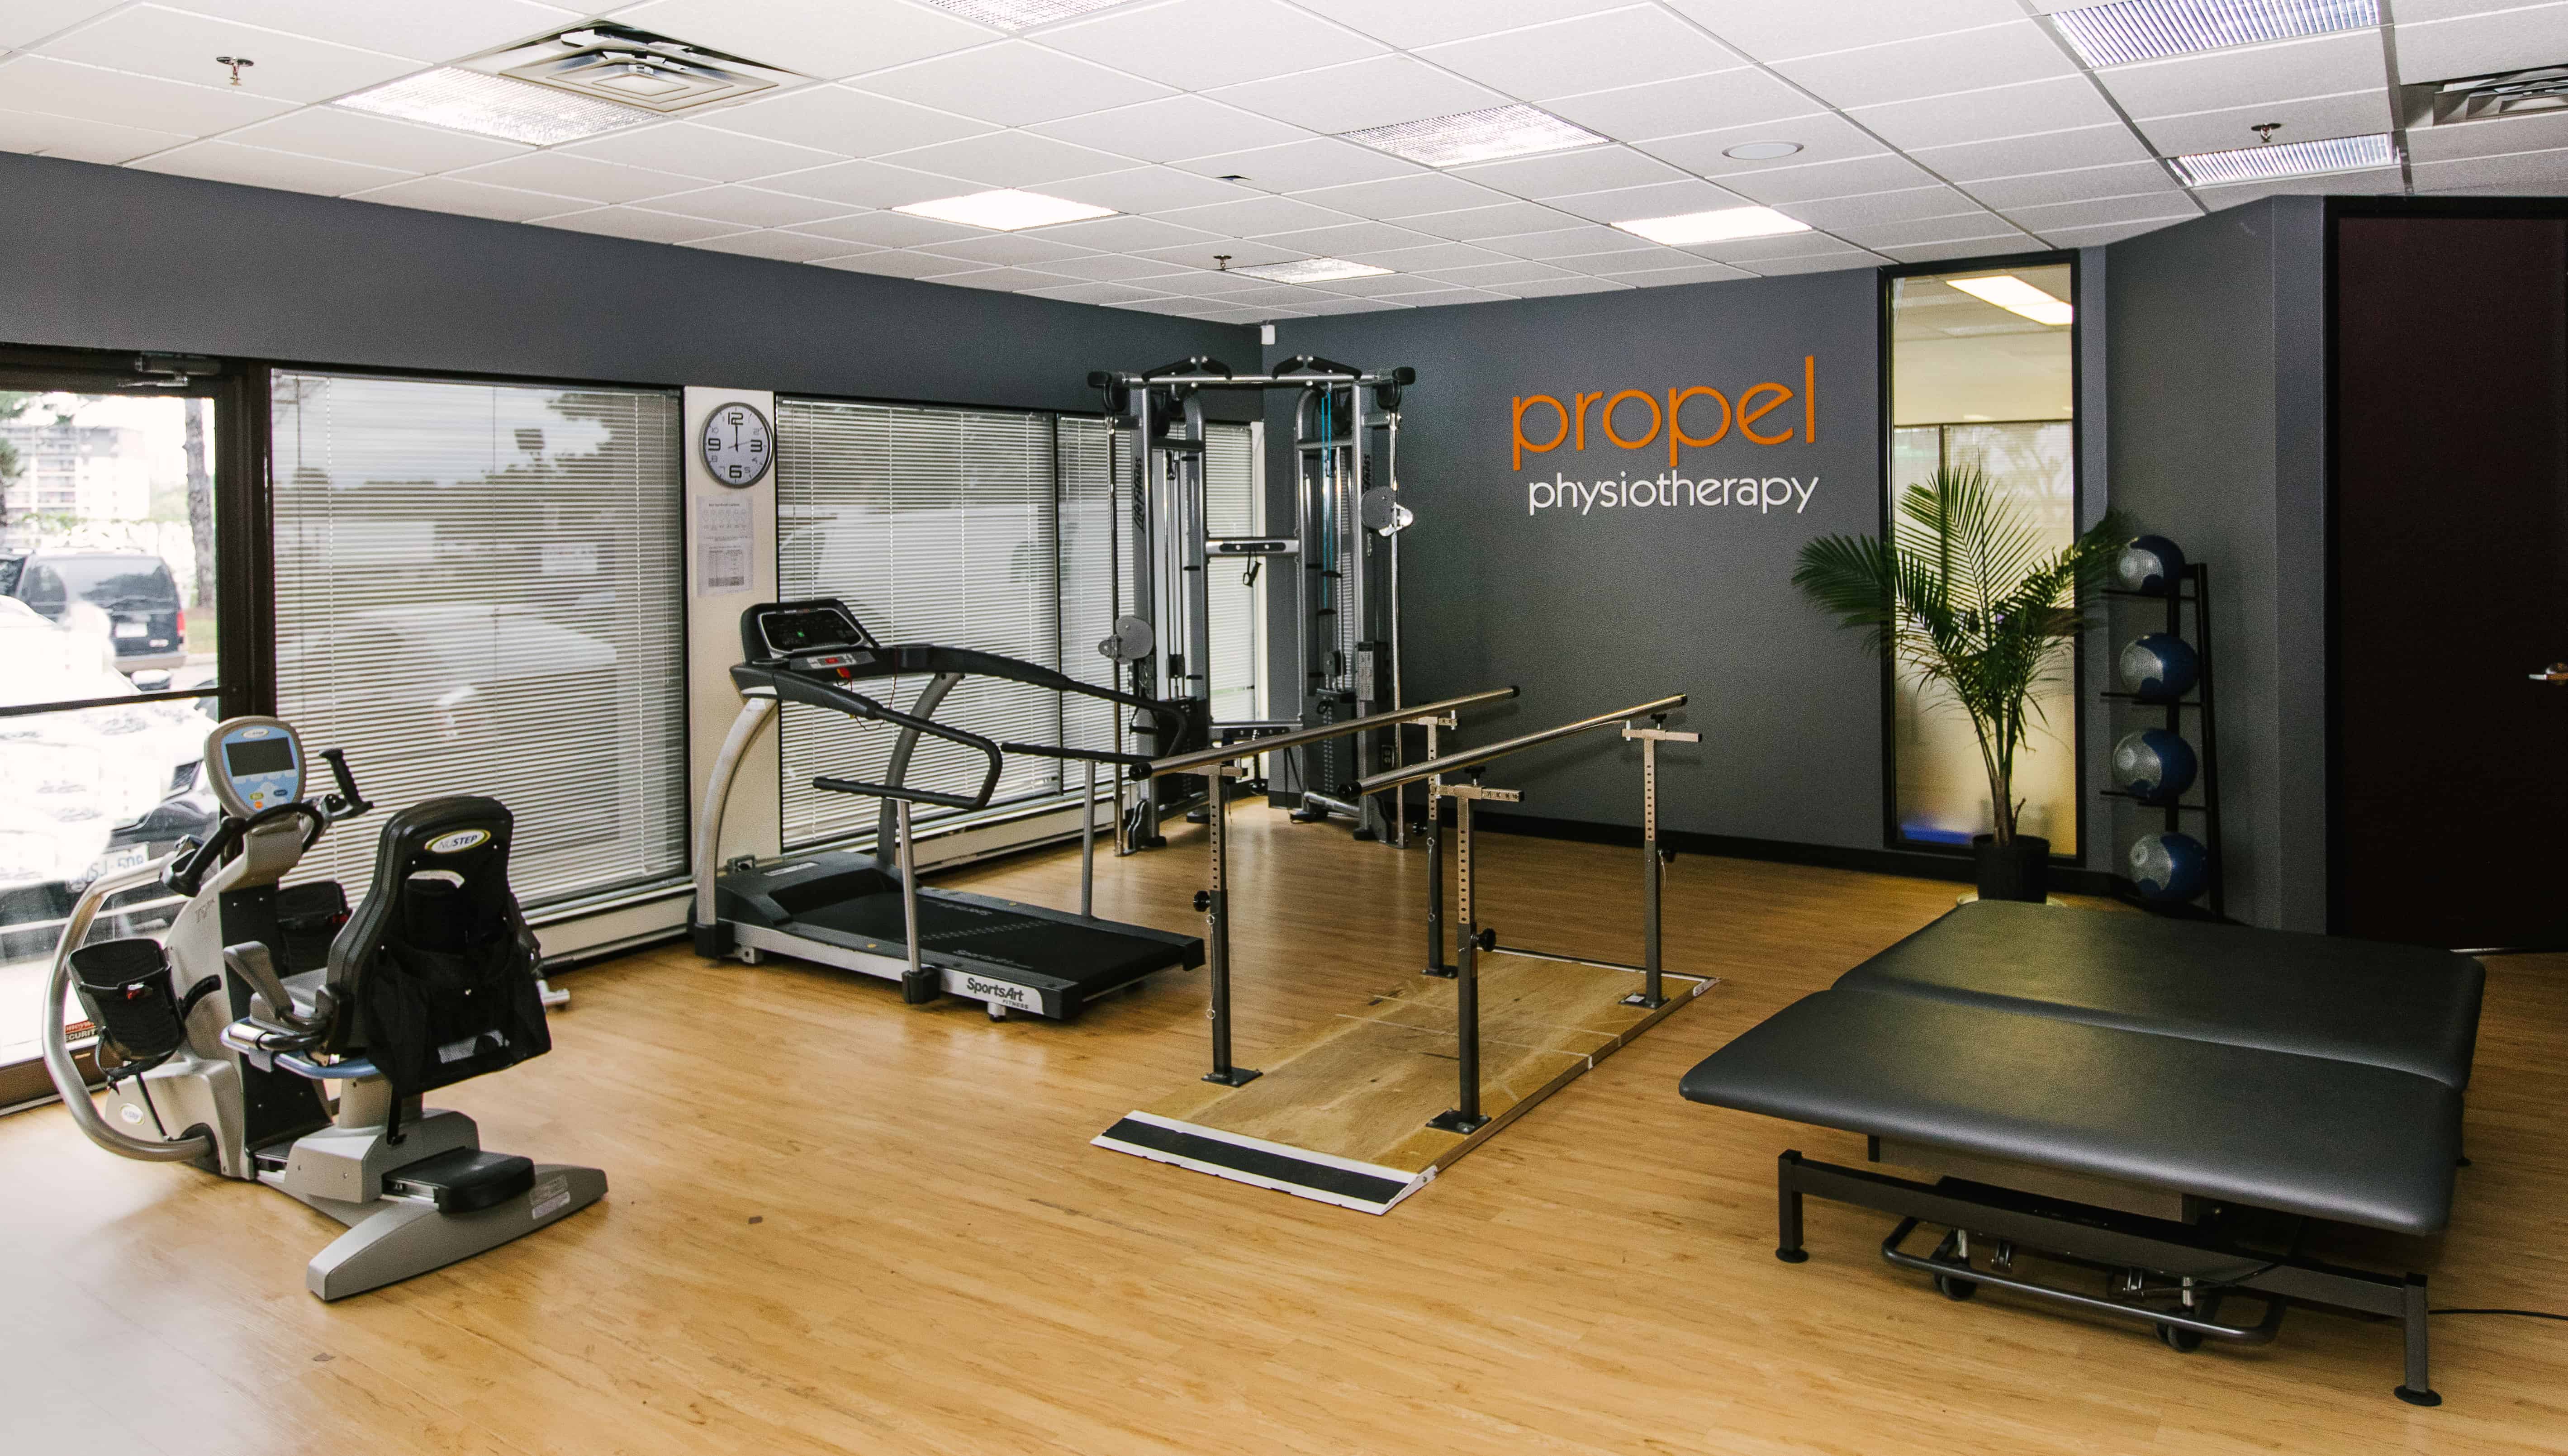 About Propel Physiotherapy Clinic Toronto